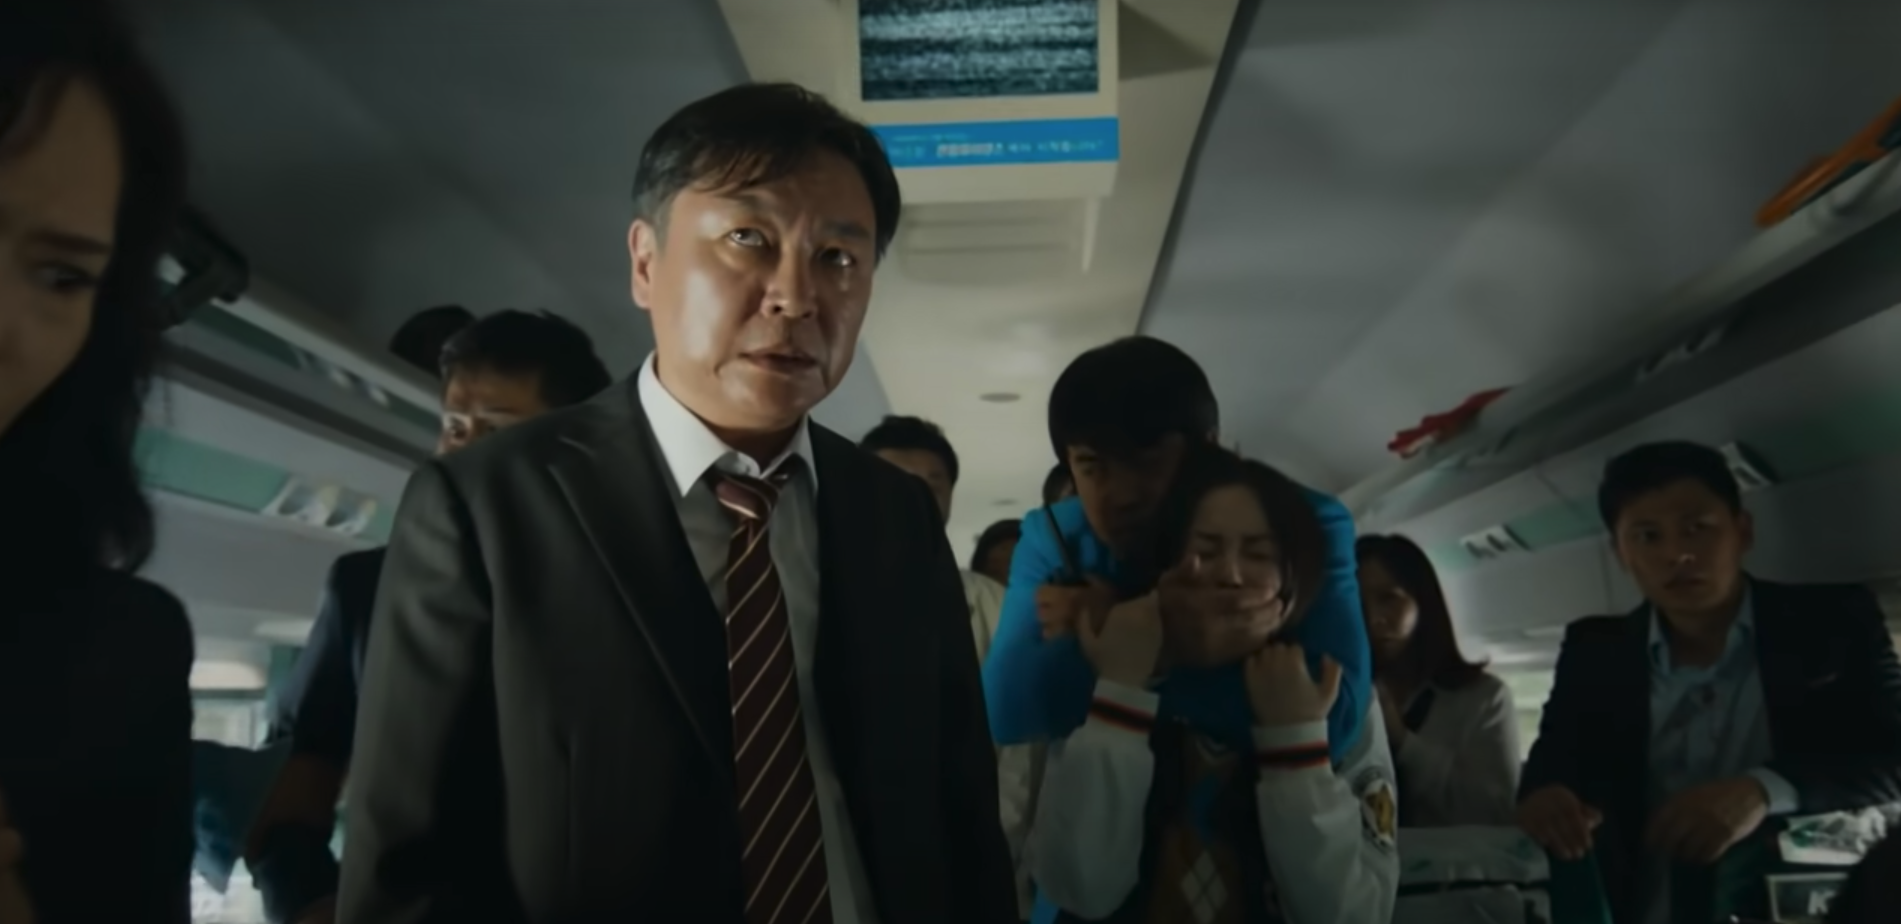 Kim Eui-sung as Yong-suk in a suit stares at survivors begging for help in &quot;Train to Busan&quot;